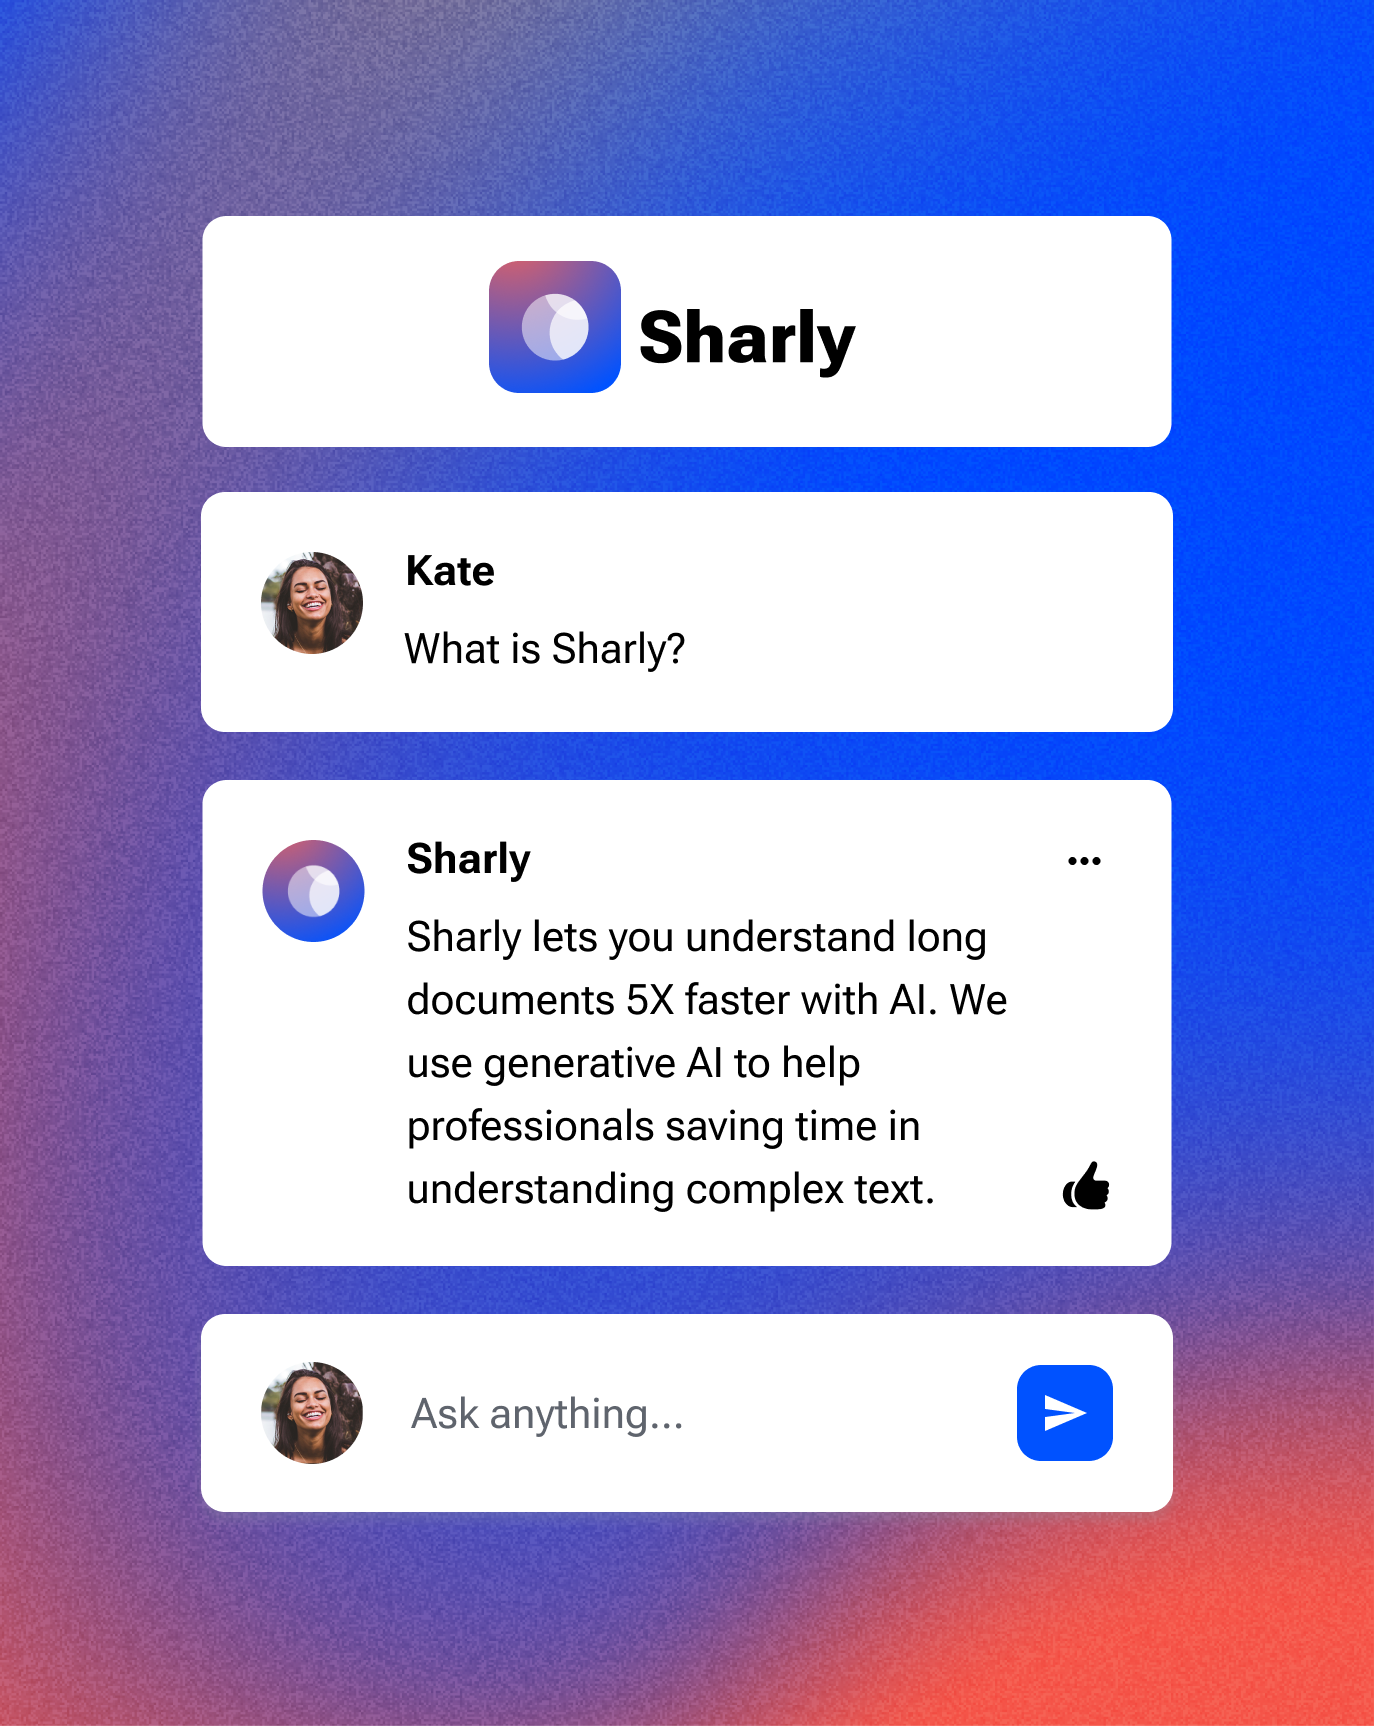 Sharly AI - A tool to simplify text documents